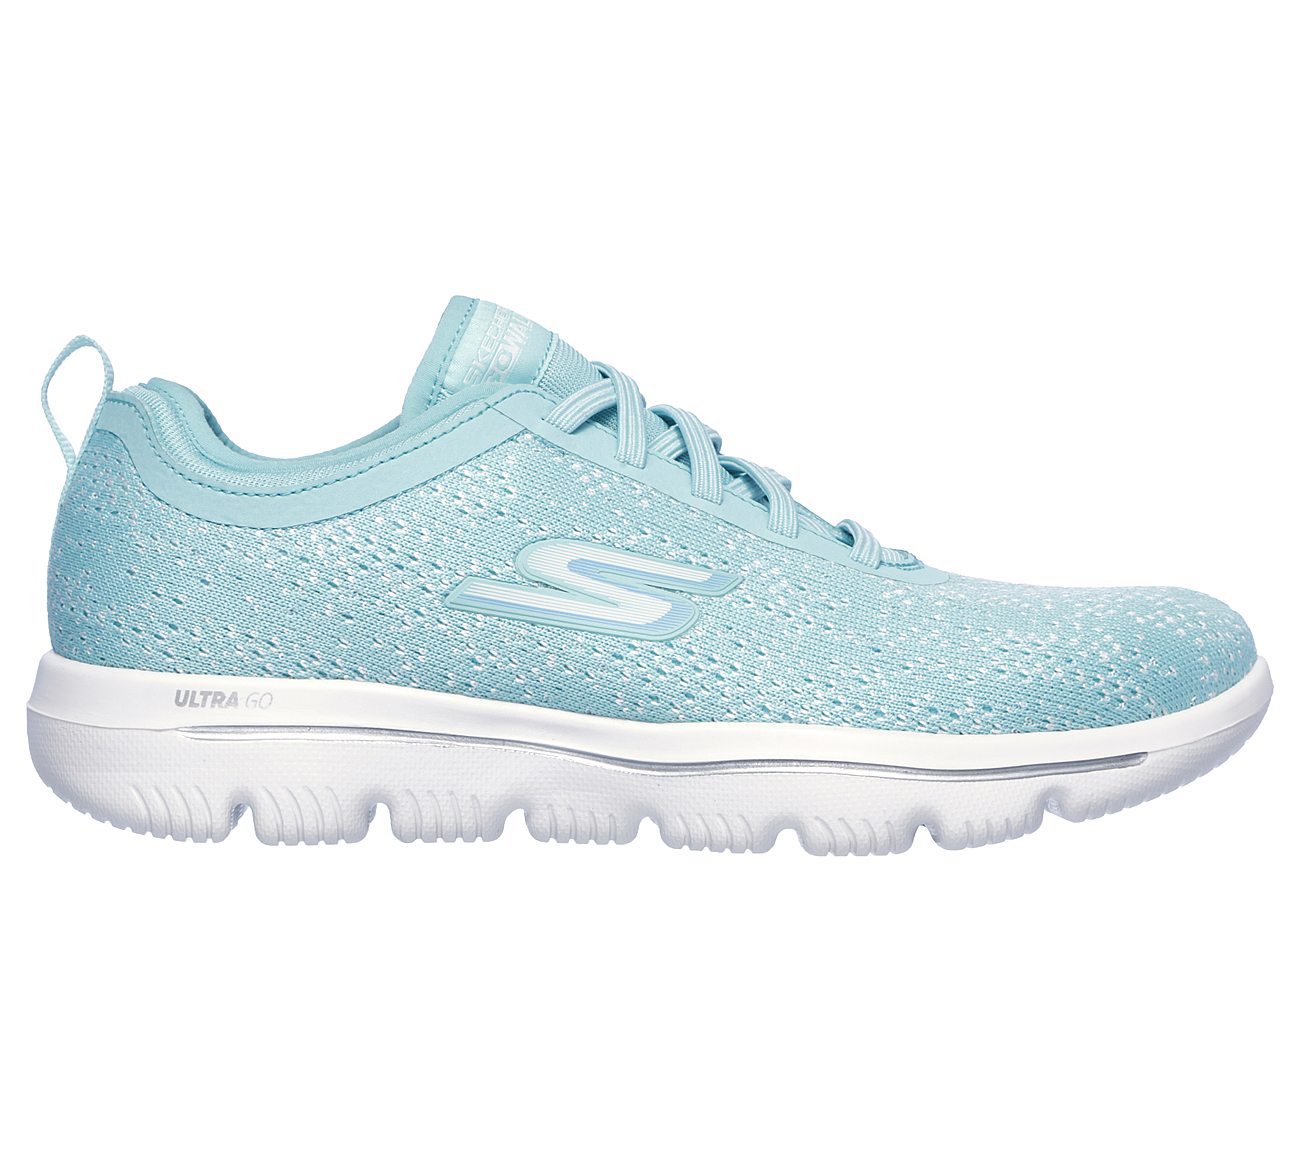 GO WALK EVOLUTION ULTRA-MIRAB, TURQUOISE Footwear Right View